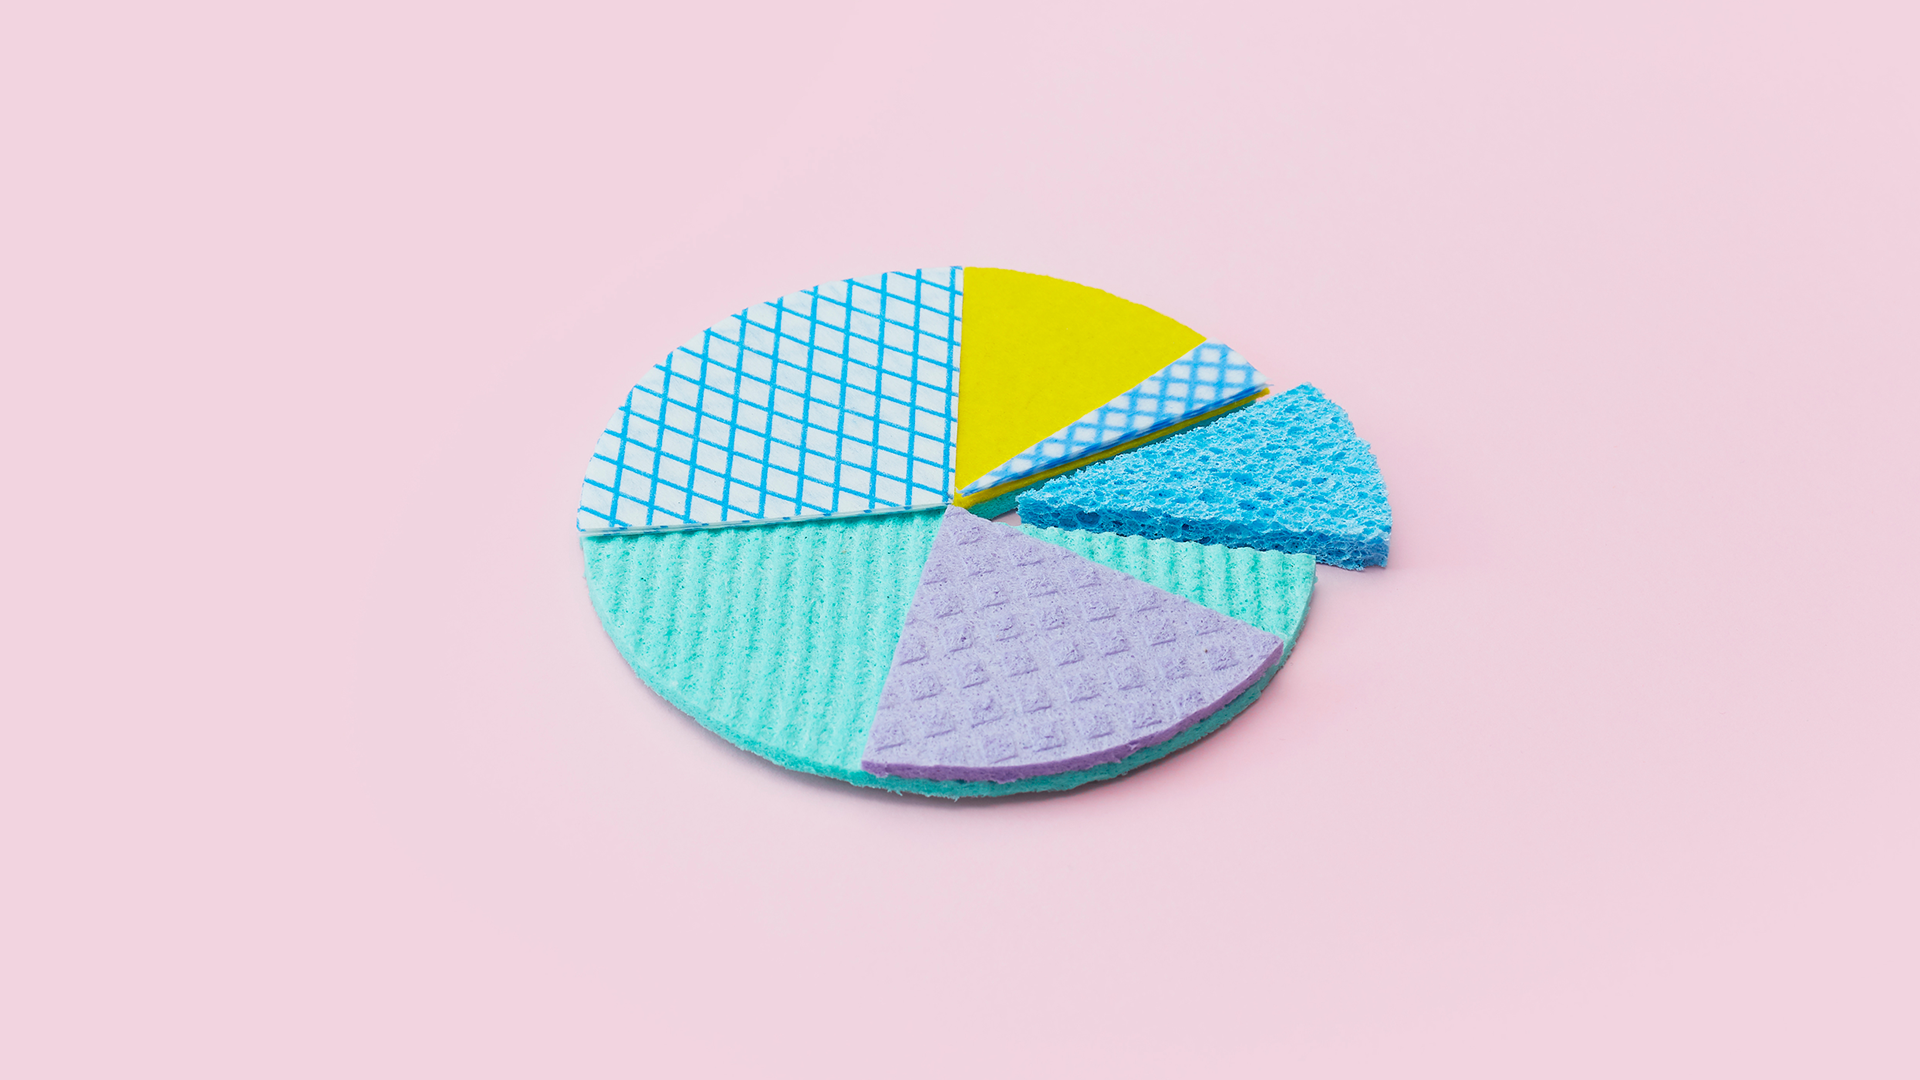 Multicolor pie chart on pink background